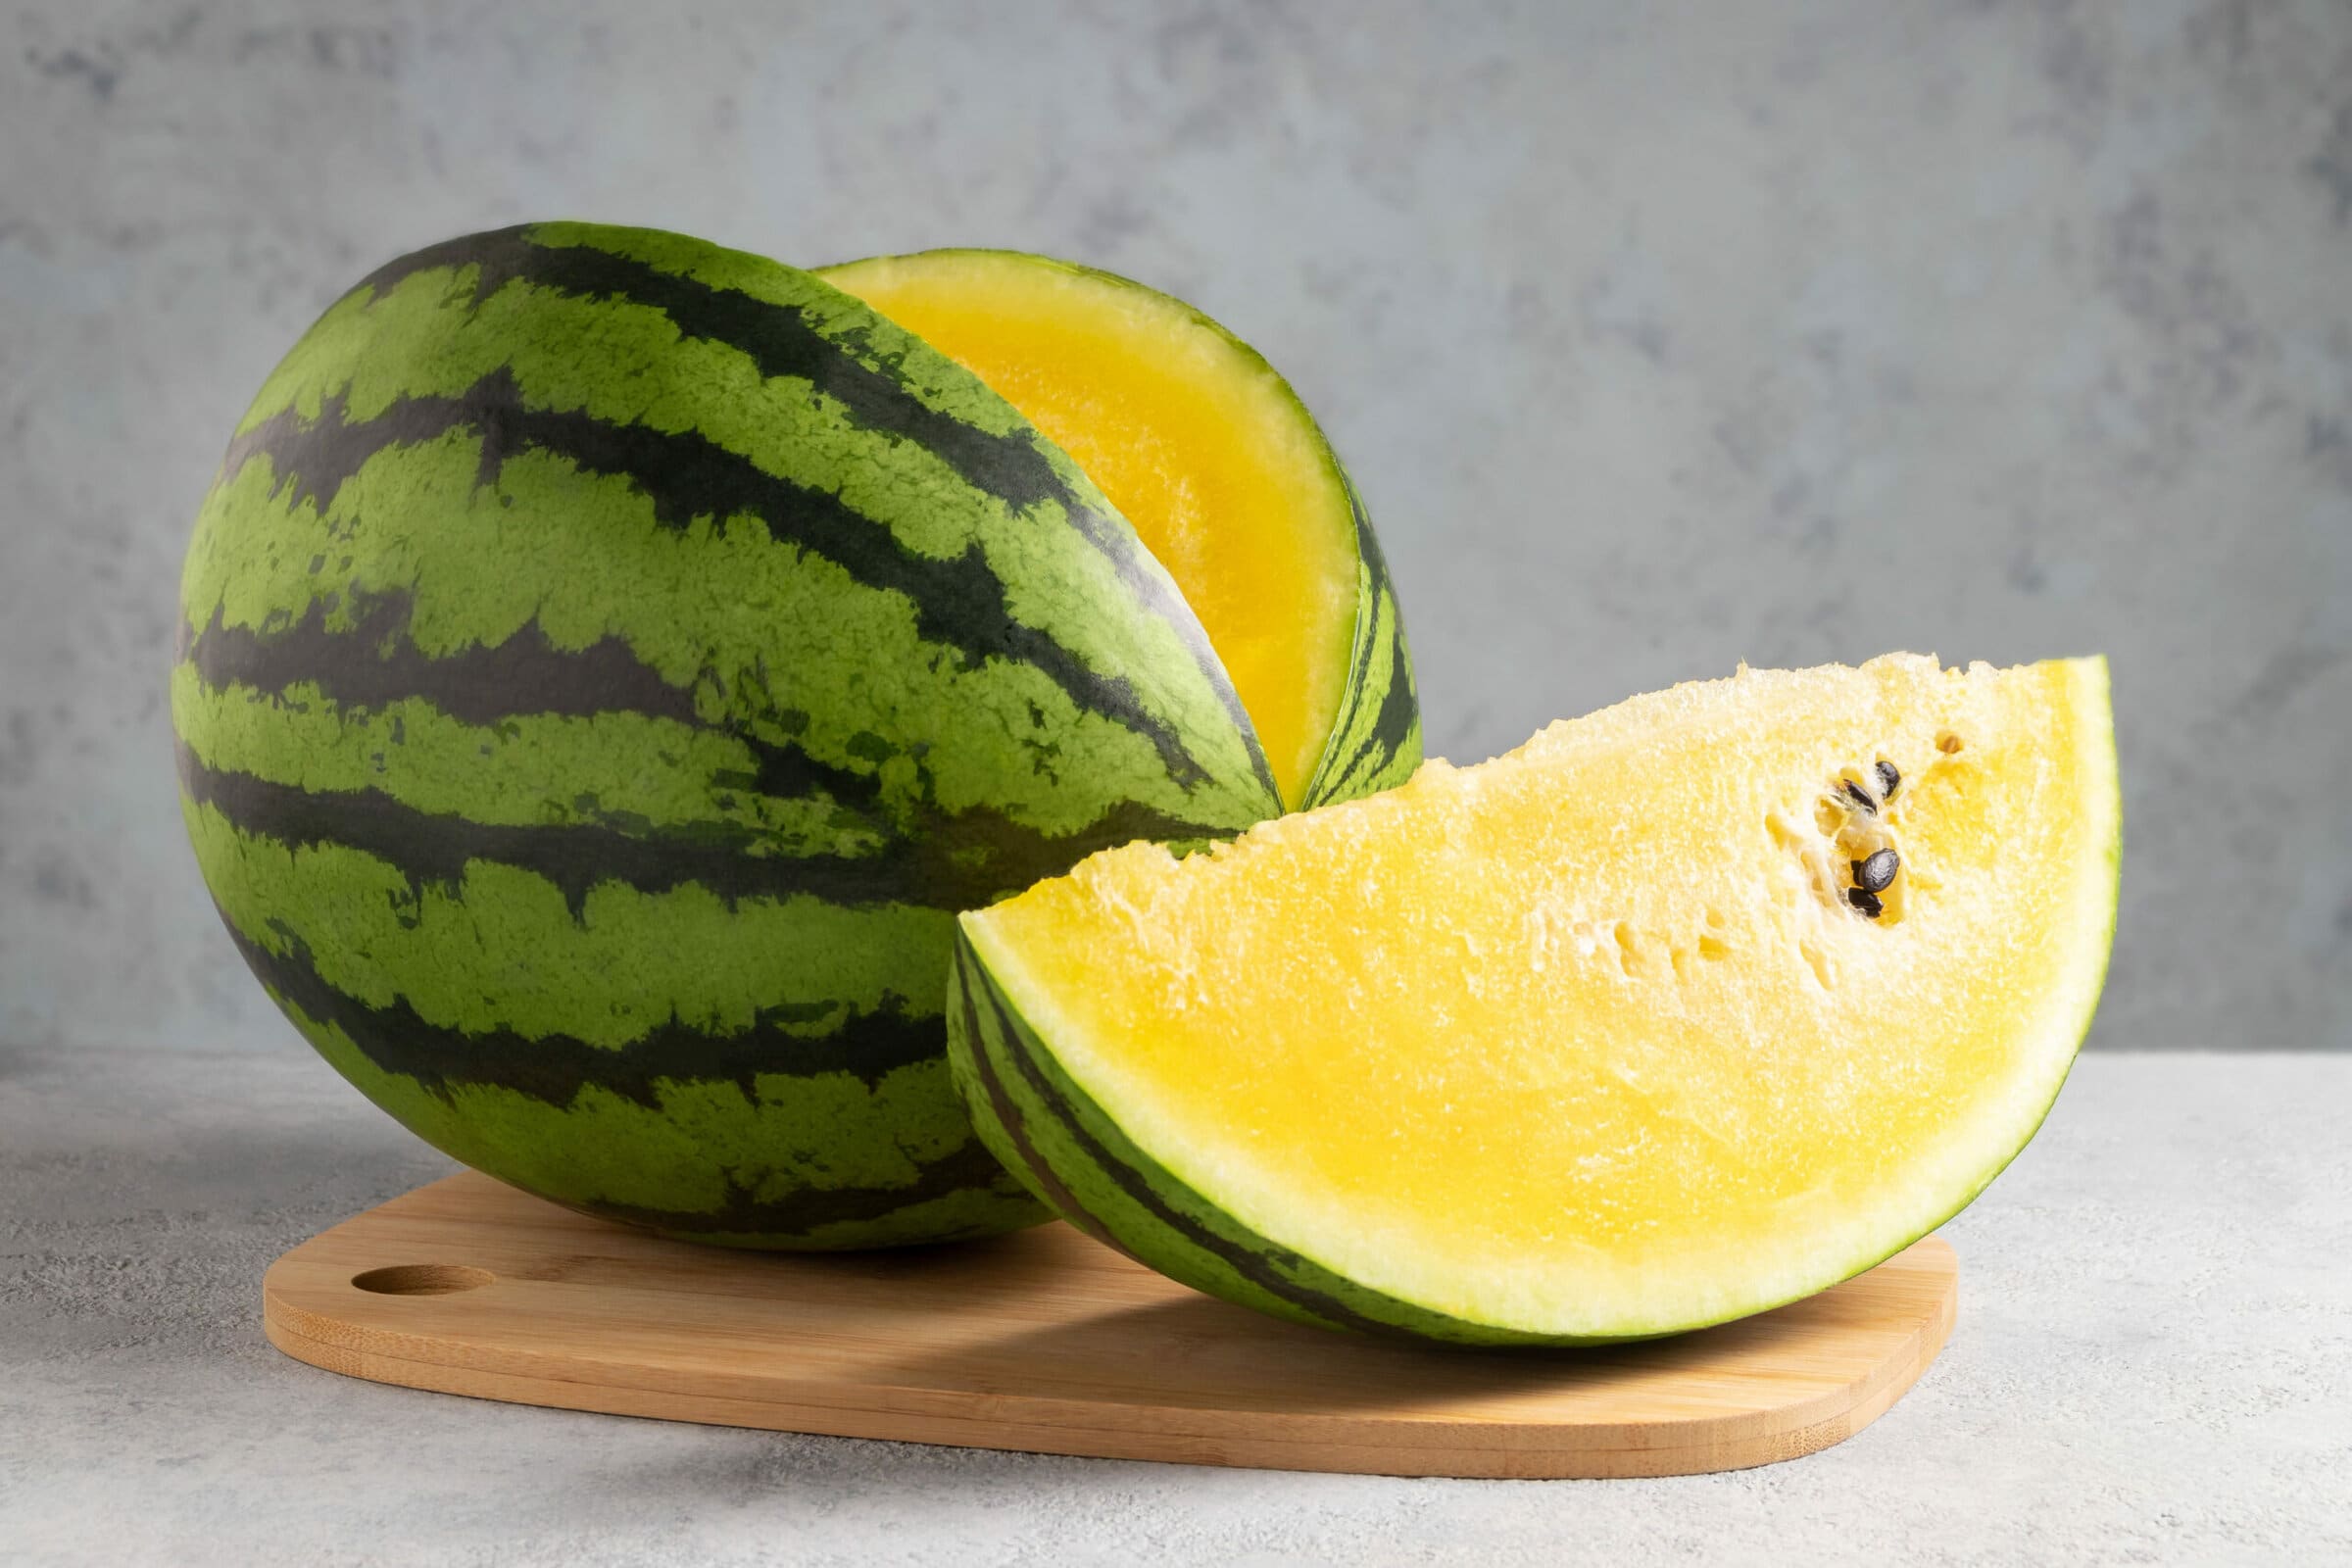 Whole Ripe Yellow Watermelon Sliced Placed on Top of Wooden Cutting Board